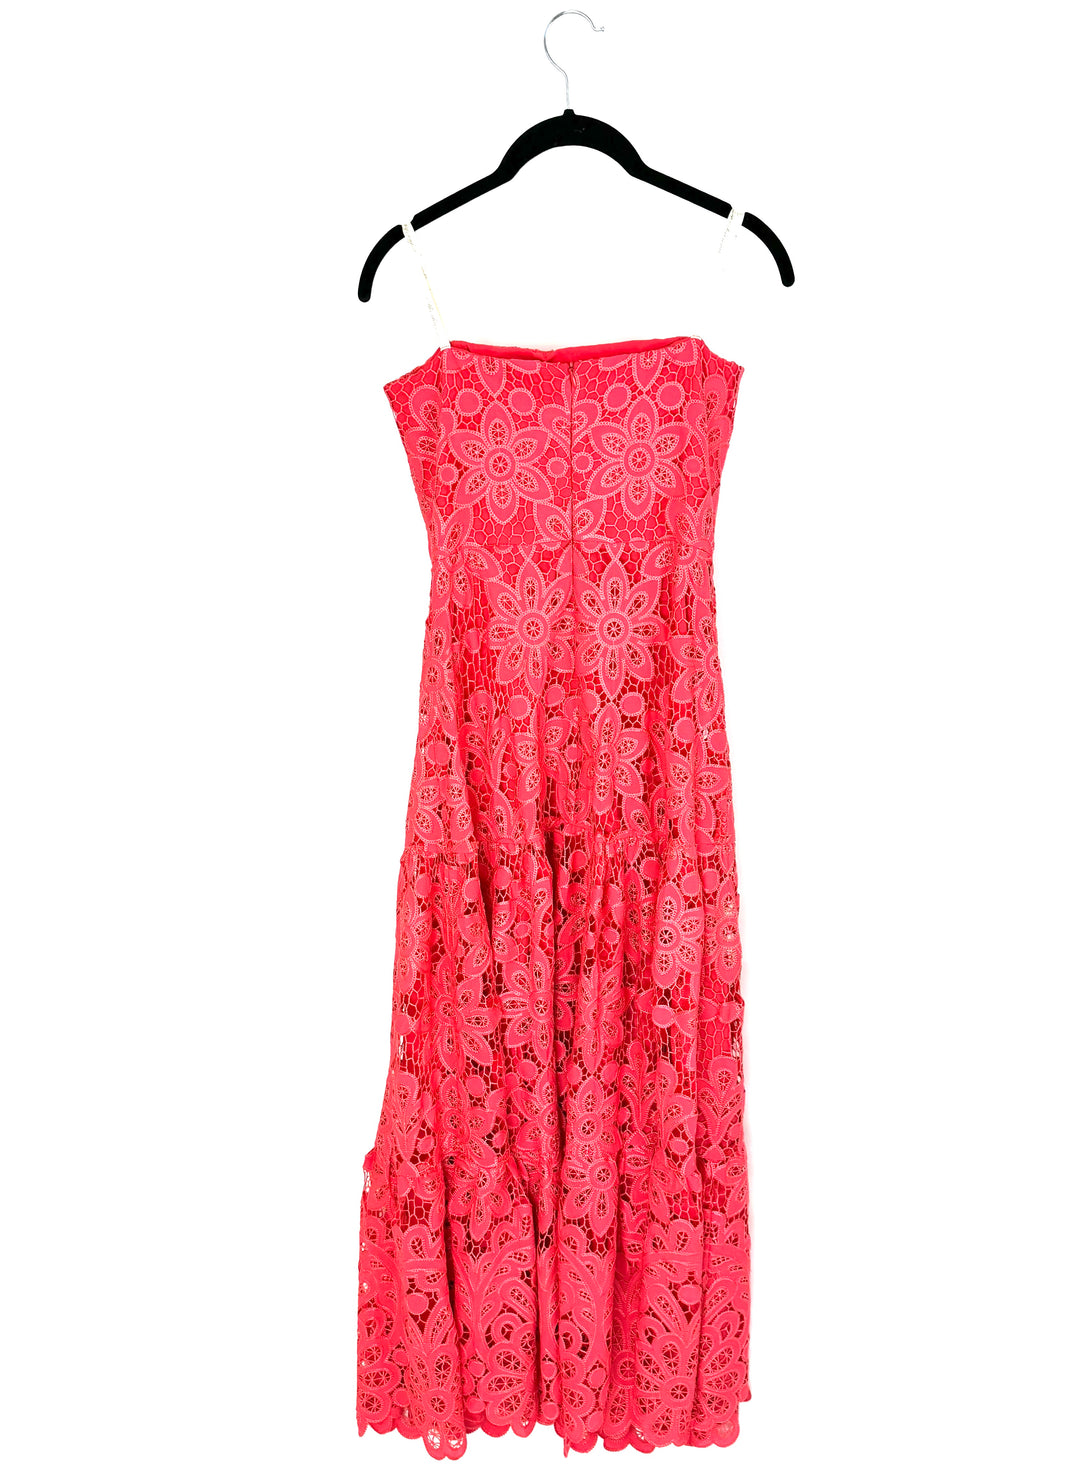 Coral Pink Floral Strapless Dress - Size 4